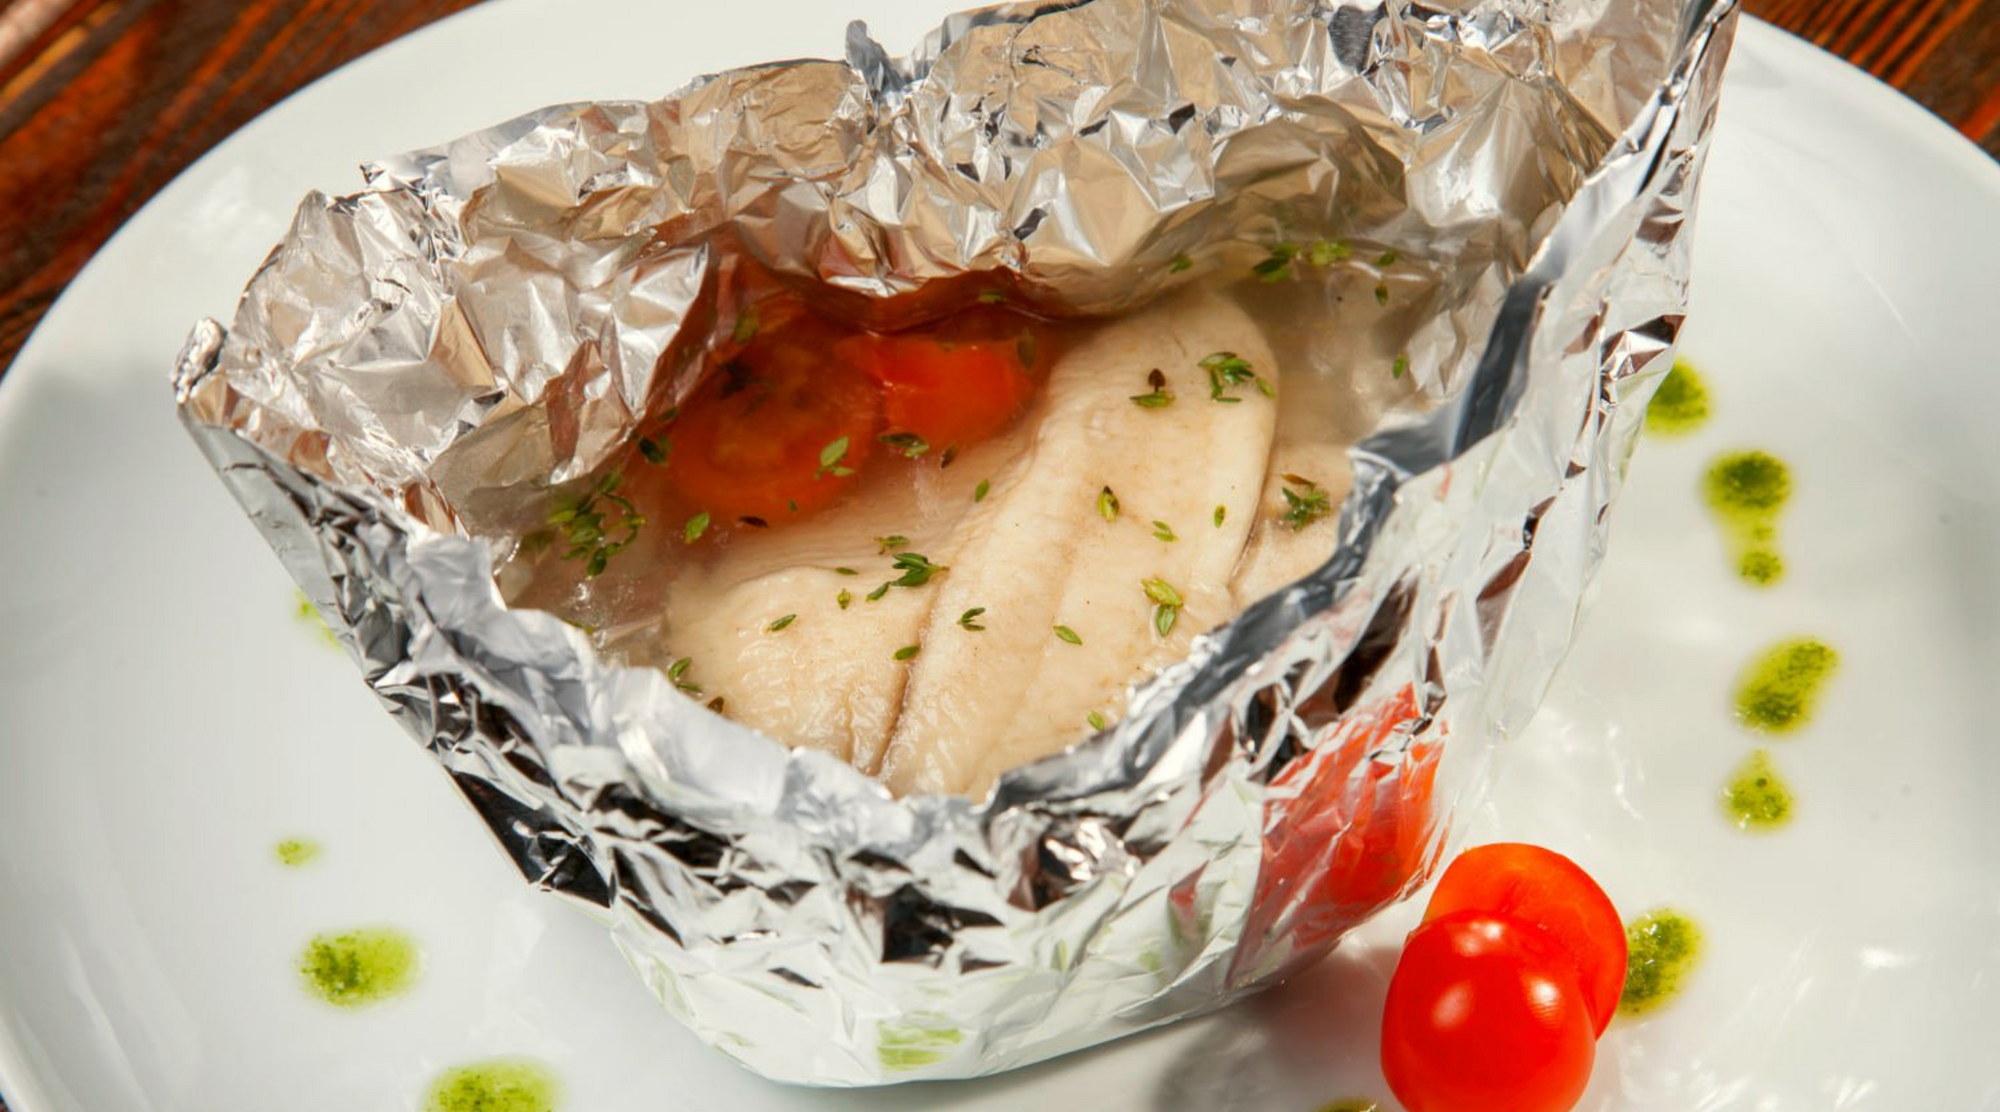 Healthy Foil Baked Fish with Spinach and Tomatoes Recipe